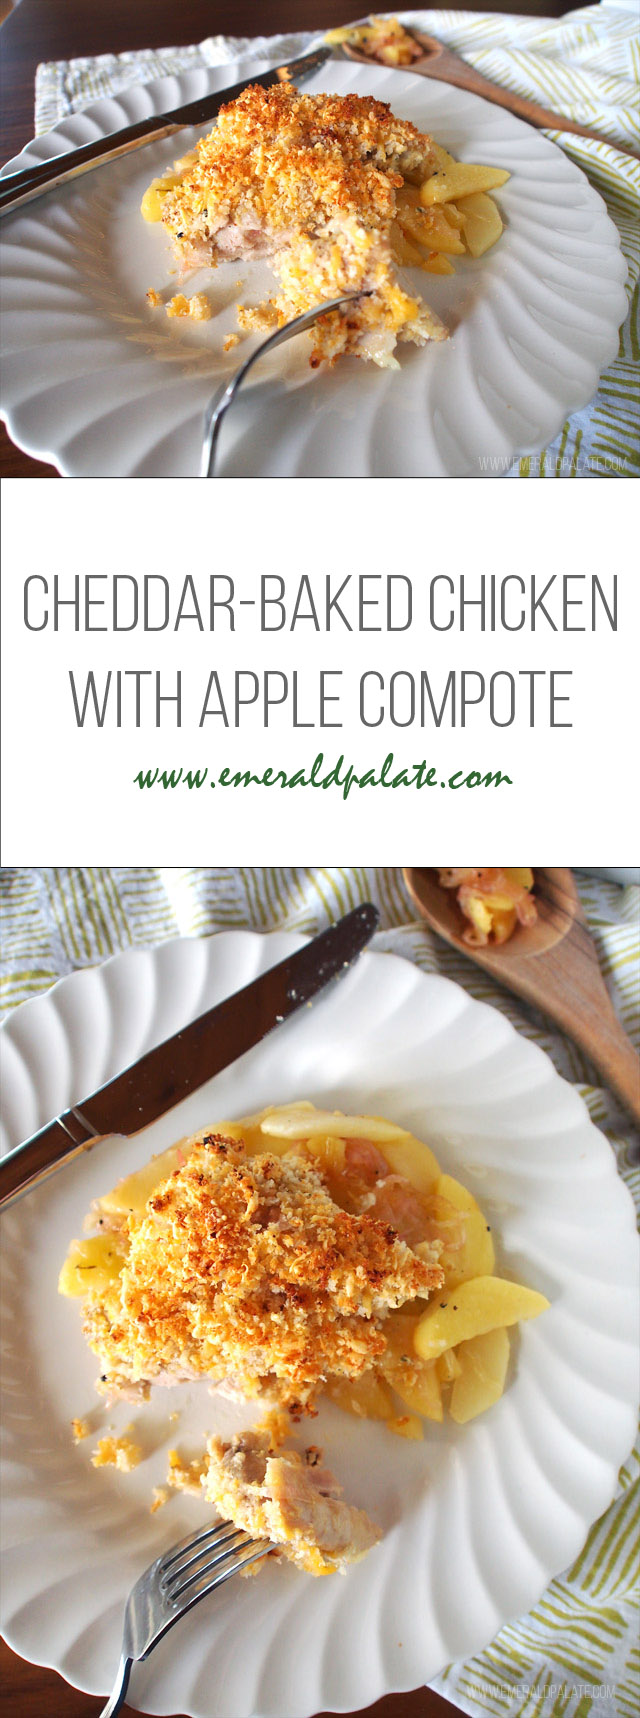 A baked chicken recipe with cheddar crust and an apple compote. It is a family meal that is the perfect fall recipe. You will have this 30 minute meal ready in no time!